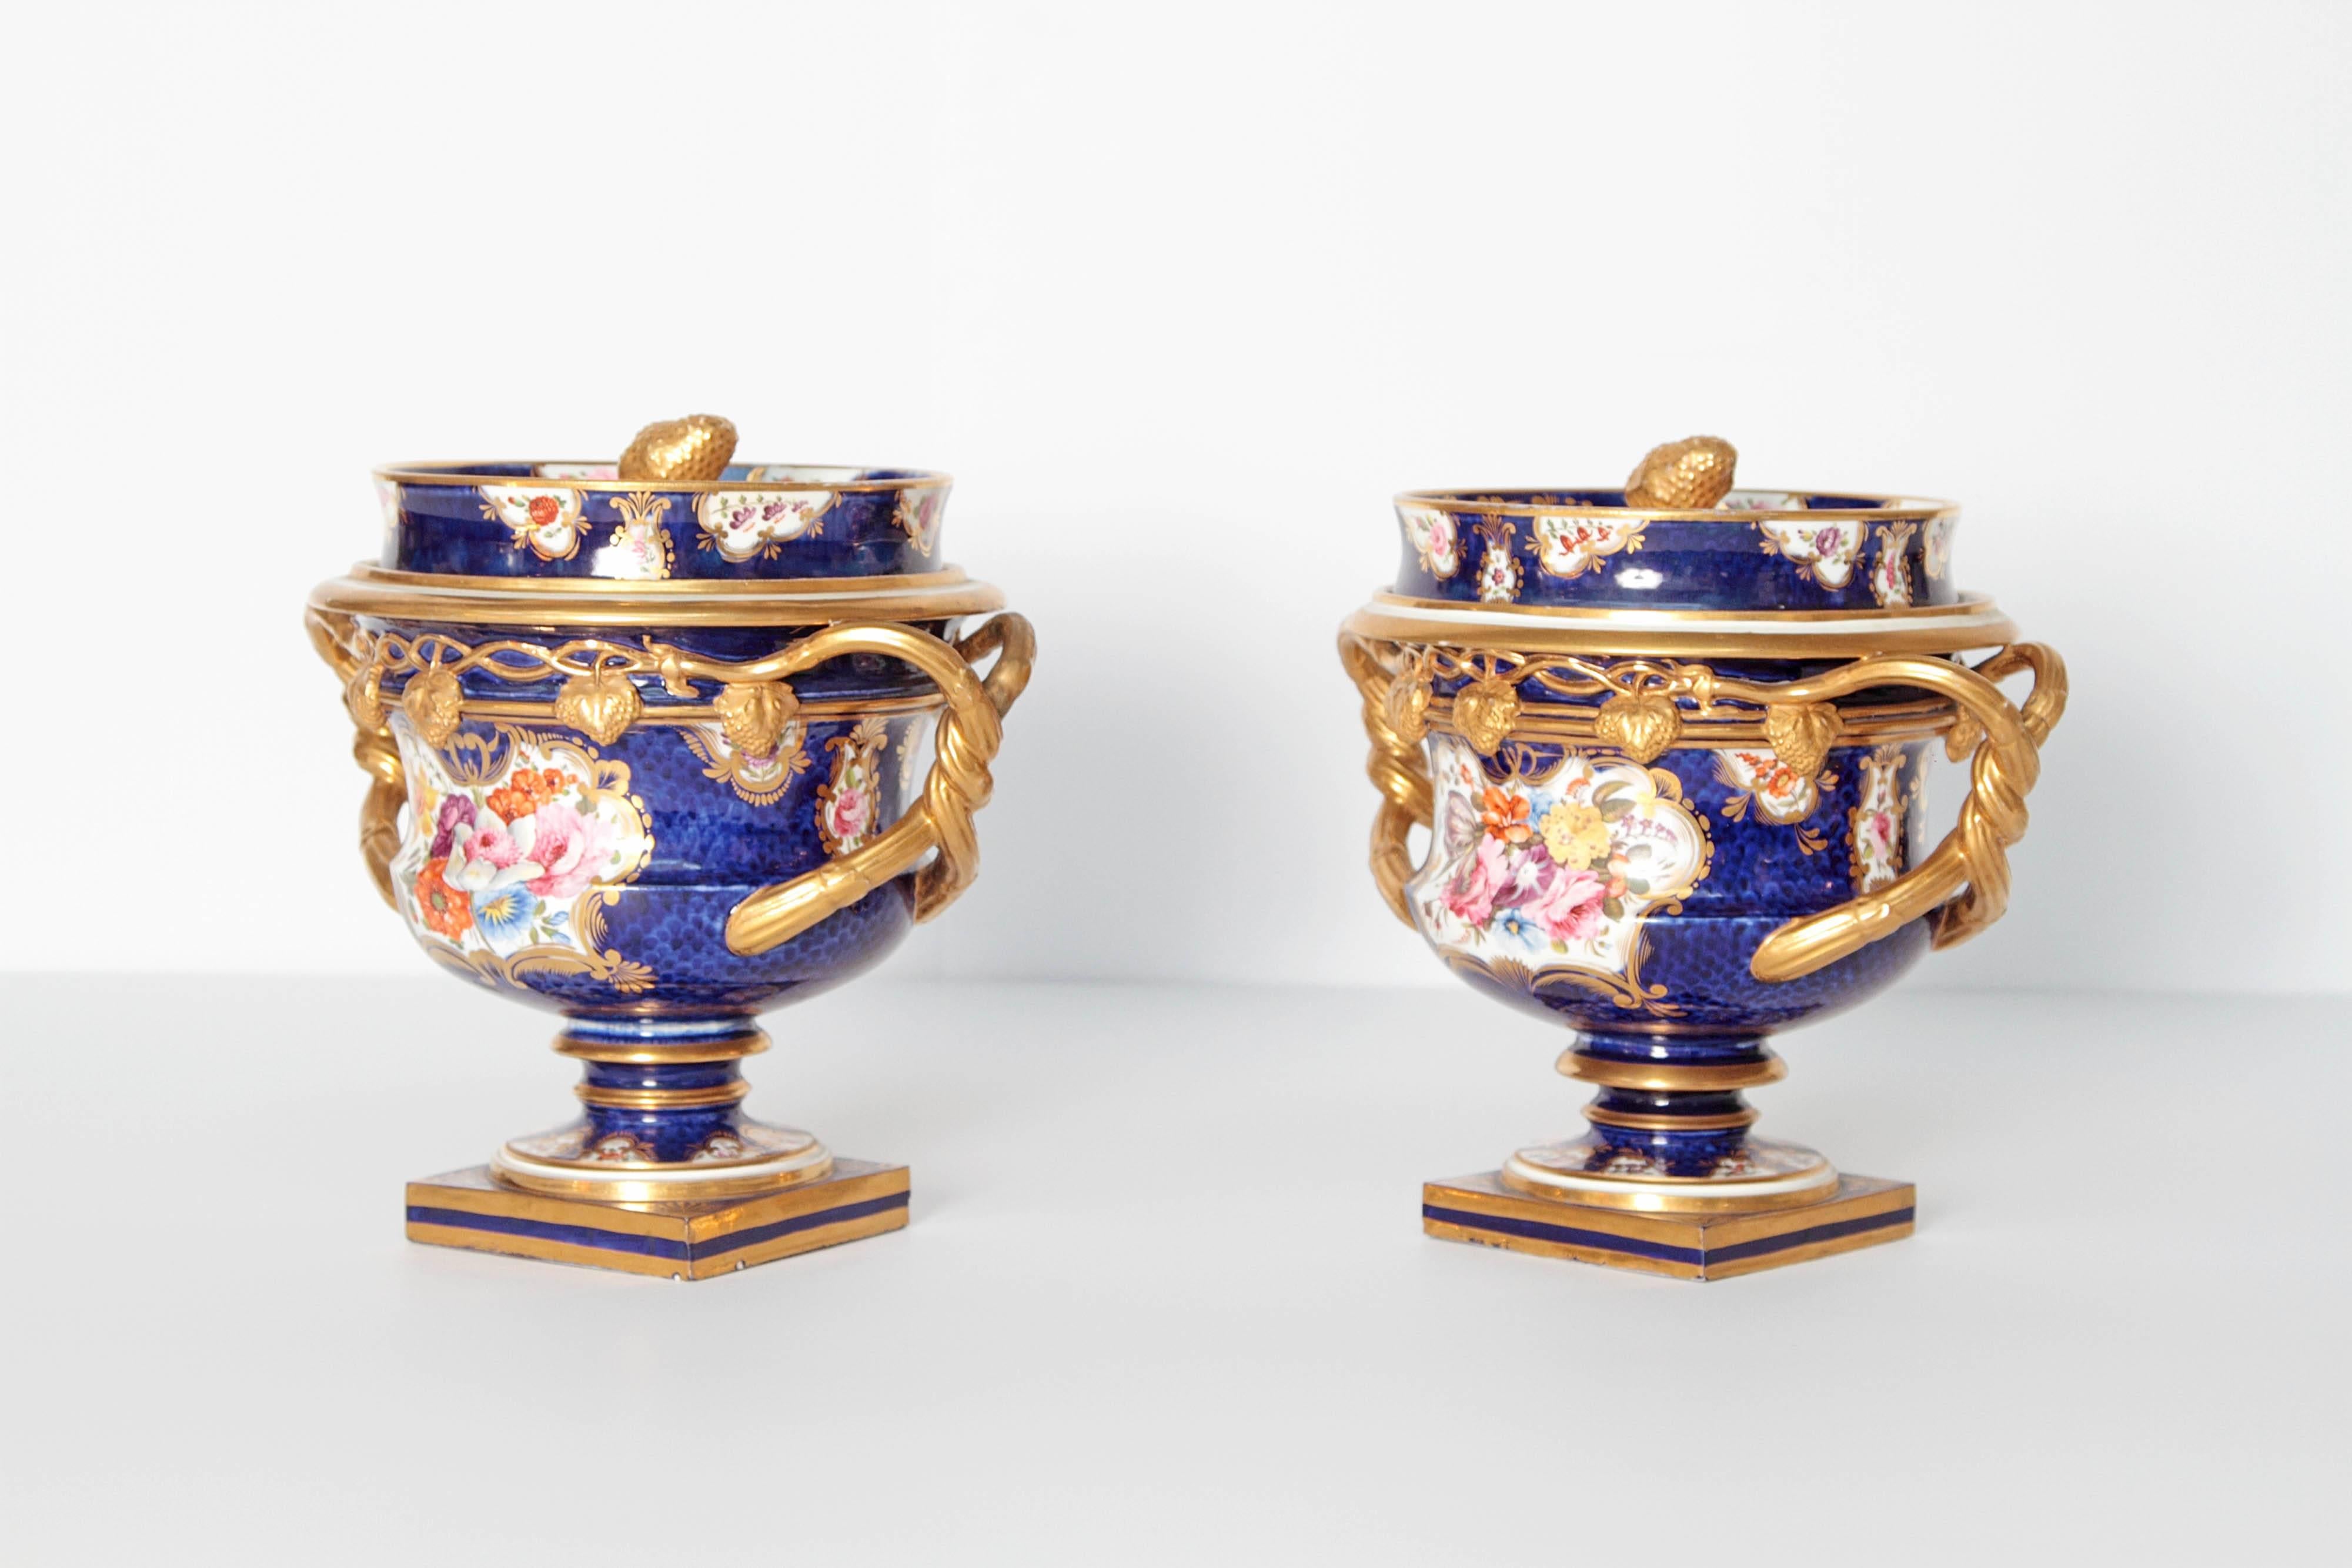 A pair of English porcelain fruit coolers with covers. Square plinth base and pedestal supporting bowls with twisted gilt handles, one of which appears to have been repaired / professionally restored. The covers with waisted gallery and strawberry